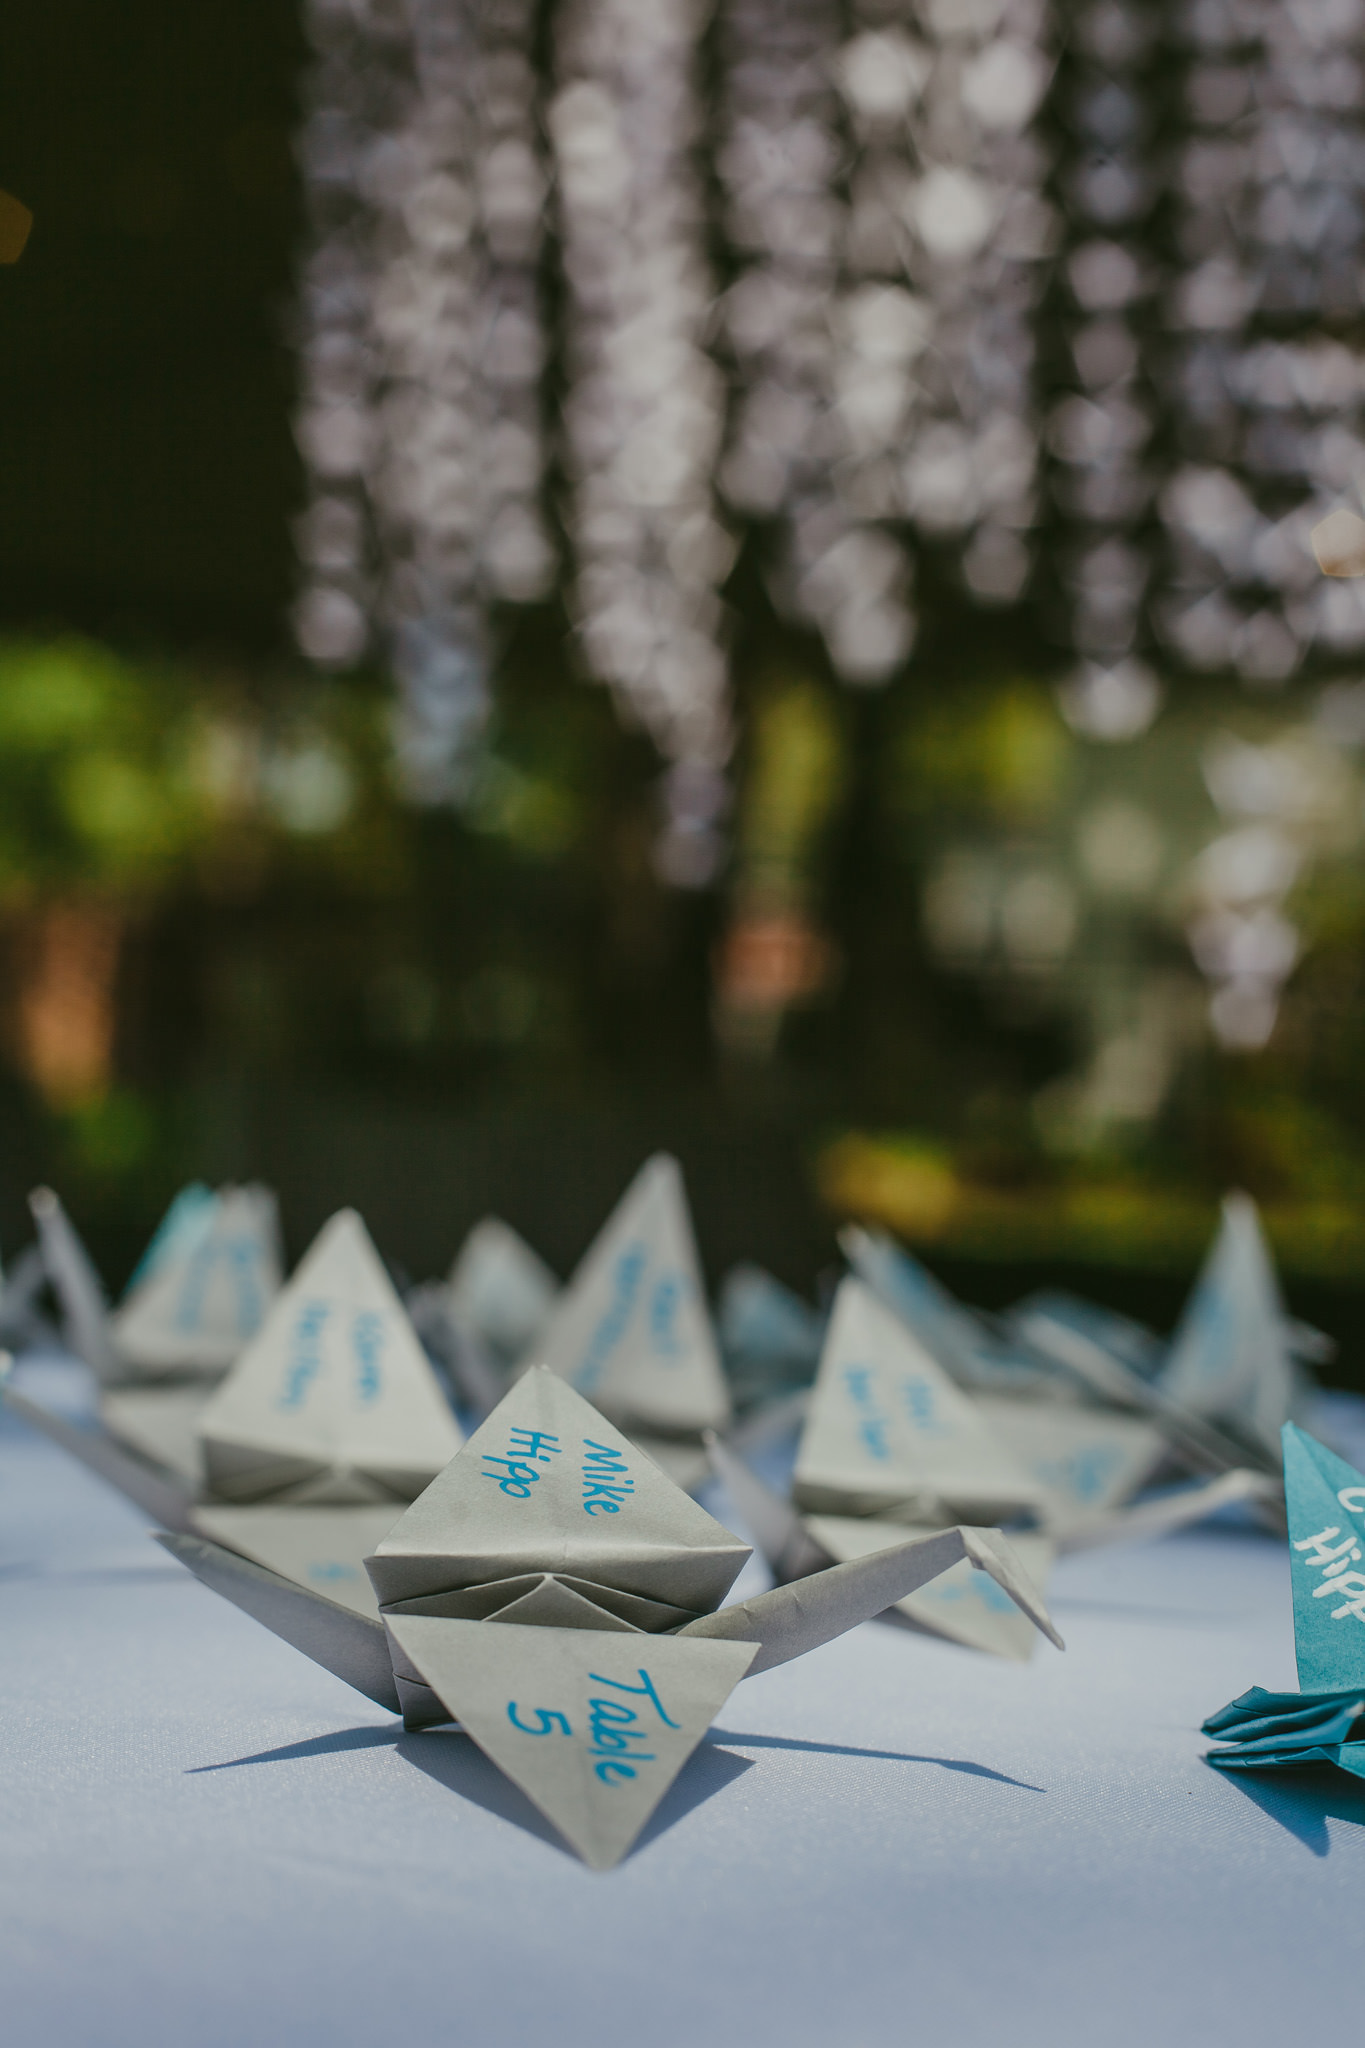 Handmade paper cranes as wedding favors at the Shuford House in Hickory